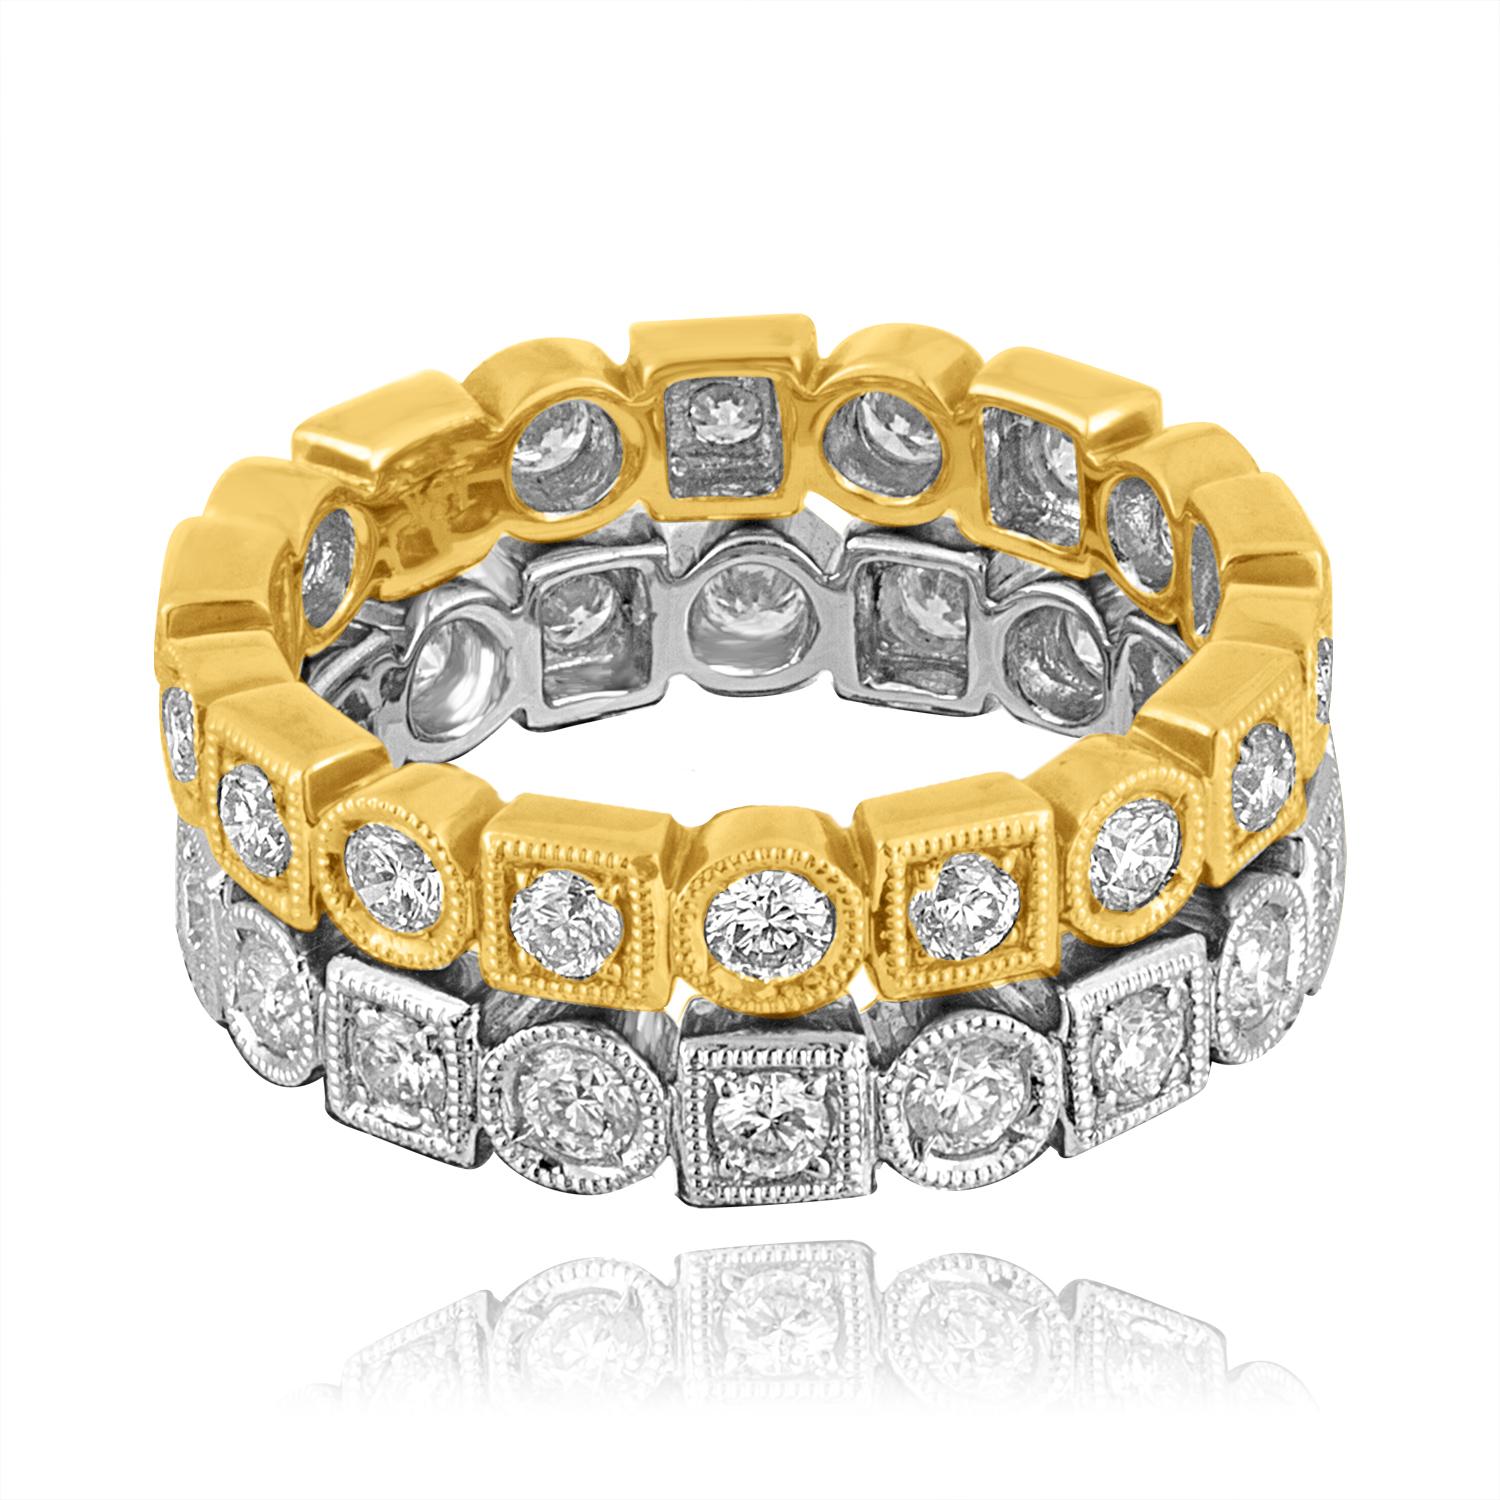 Beautiful & Classy Stackable Rings
The set consists of 2 Rings.
The rings are 18K Yellow & White Gold
18KY 0.90 Carats F/G VS/SI Diamonds 4.7 grams size 6.50
18KW 1.00 Carats F/G VS/SI Diamonds 3.9 grams size 7.00
The sizes are graduating on purpose